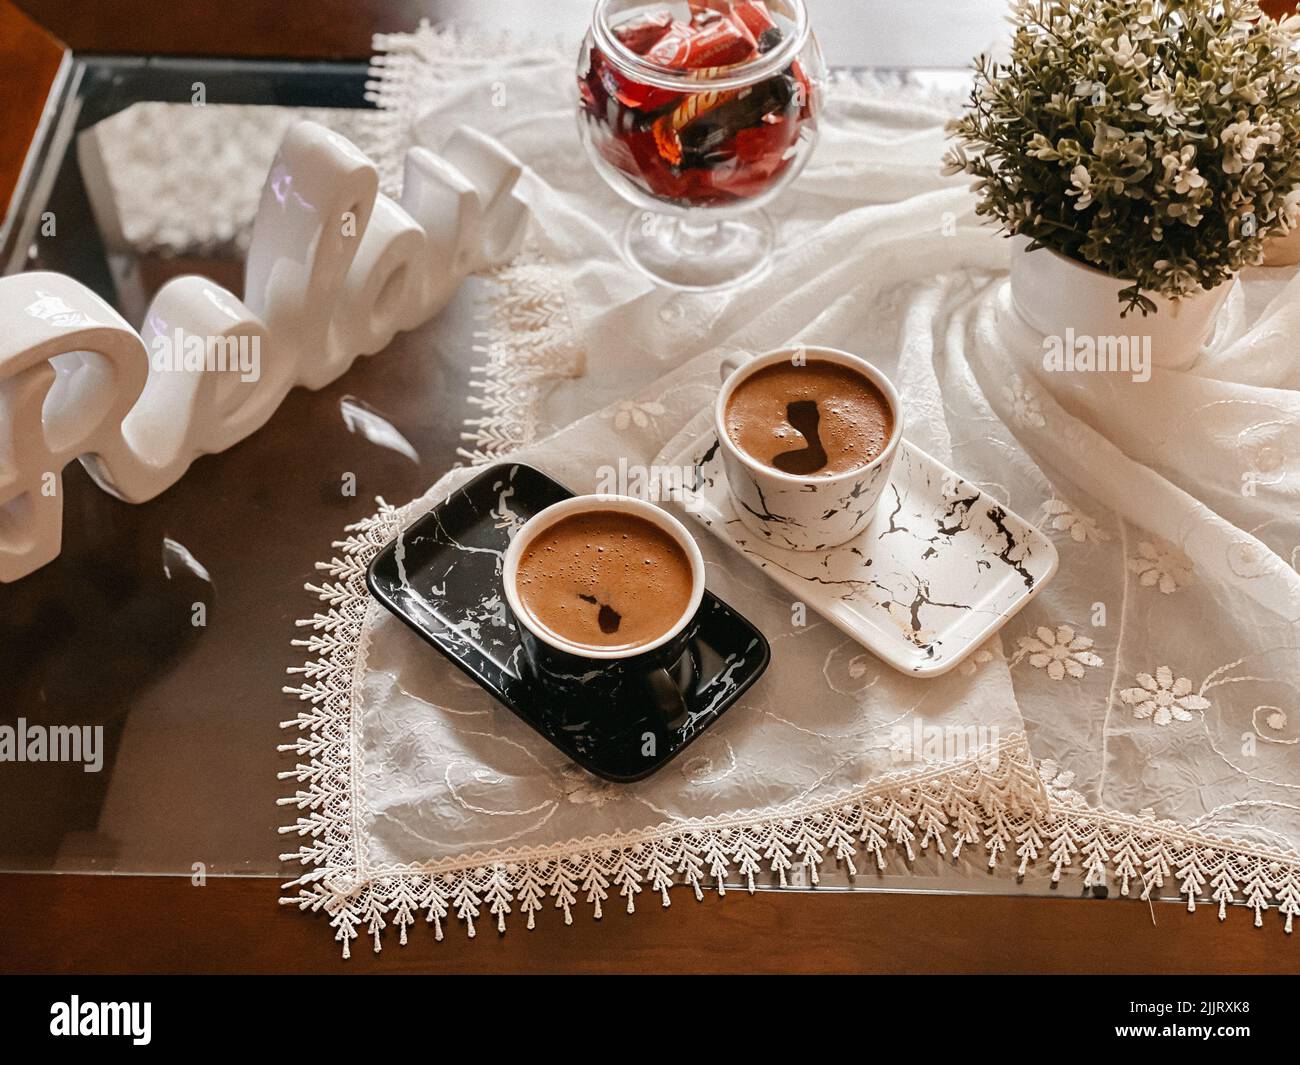 A top view of beautifully arranged cups of coffee on a tablecloth decorated with flowers Stock Photo